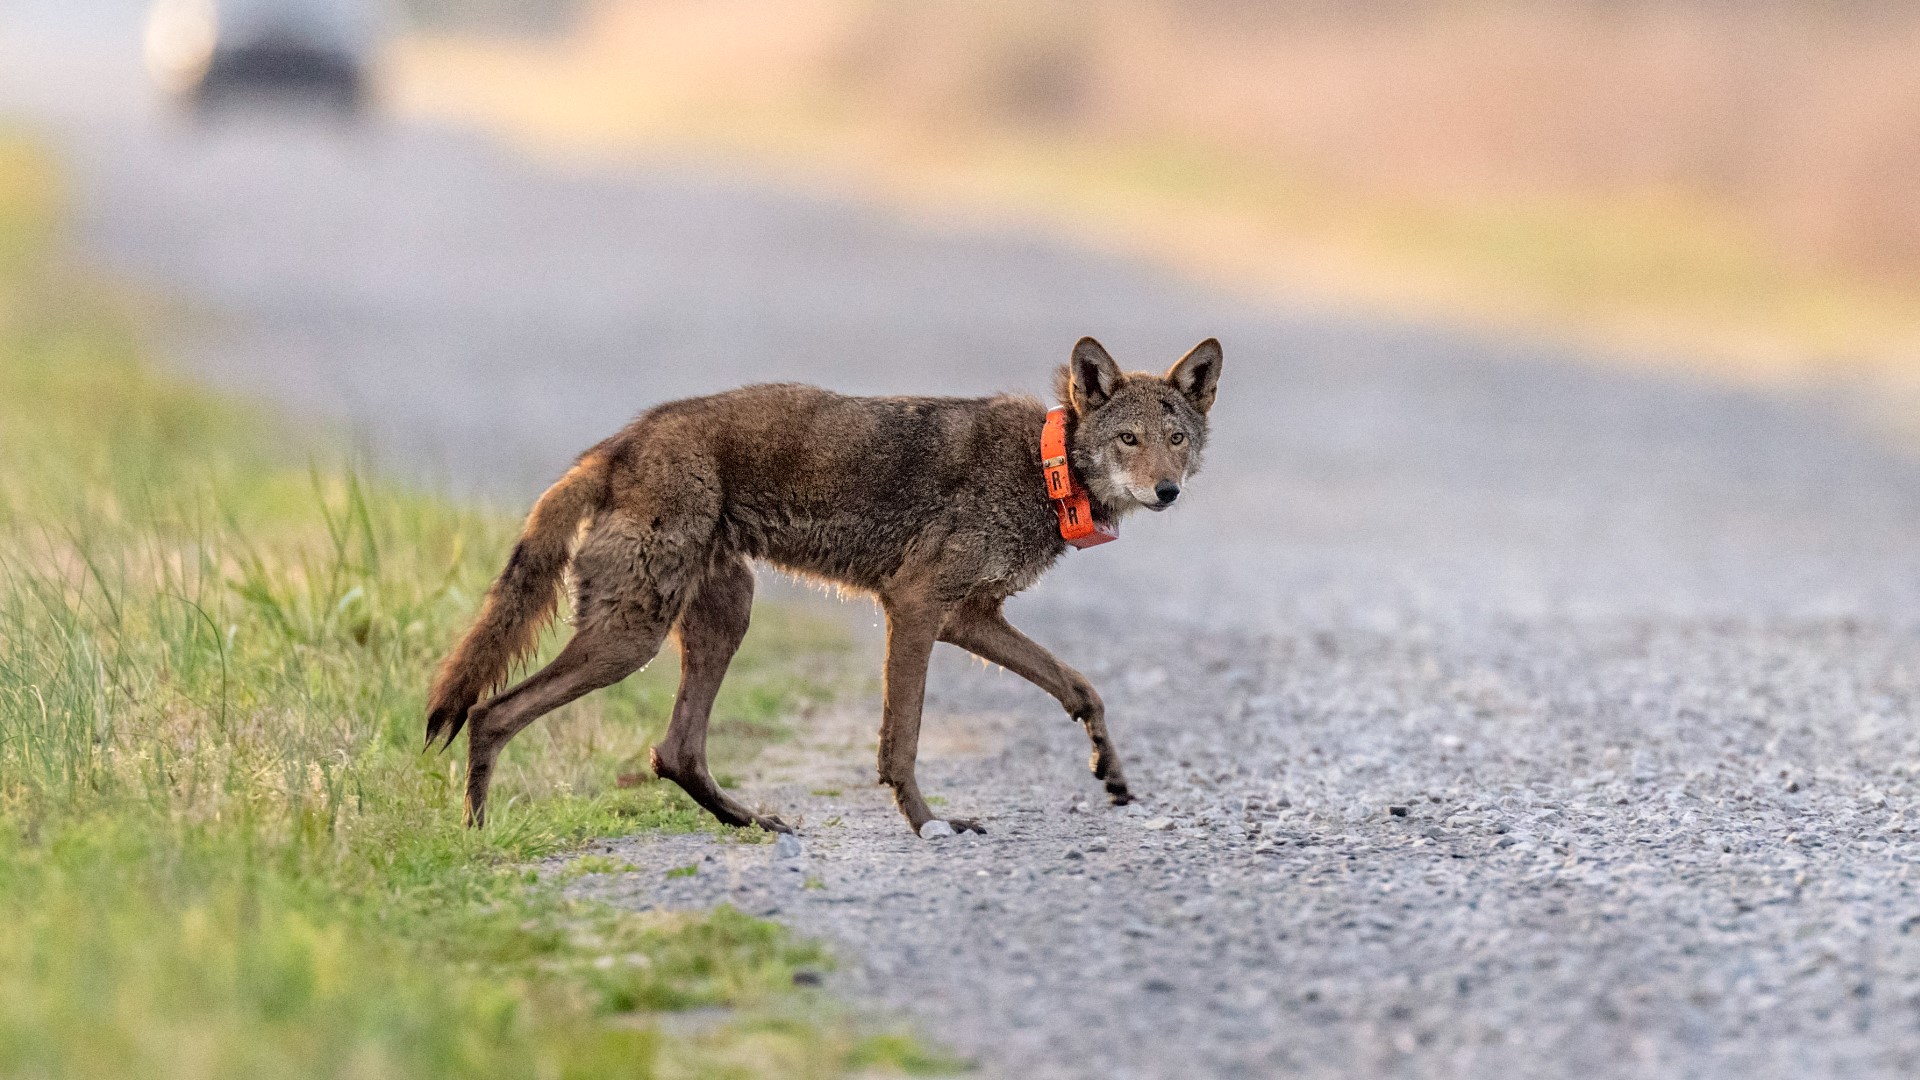 In 25 years, the red wolf went from being declared extinct in the wild to becoming hailed as an Endangered Species Act success story. Now it's under threat again.